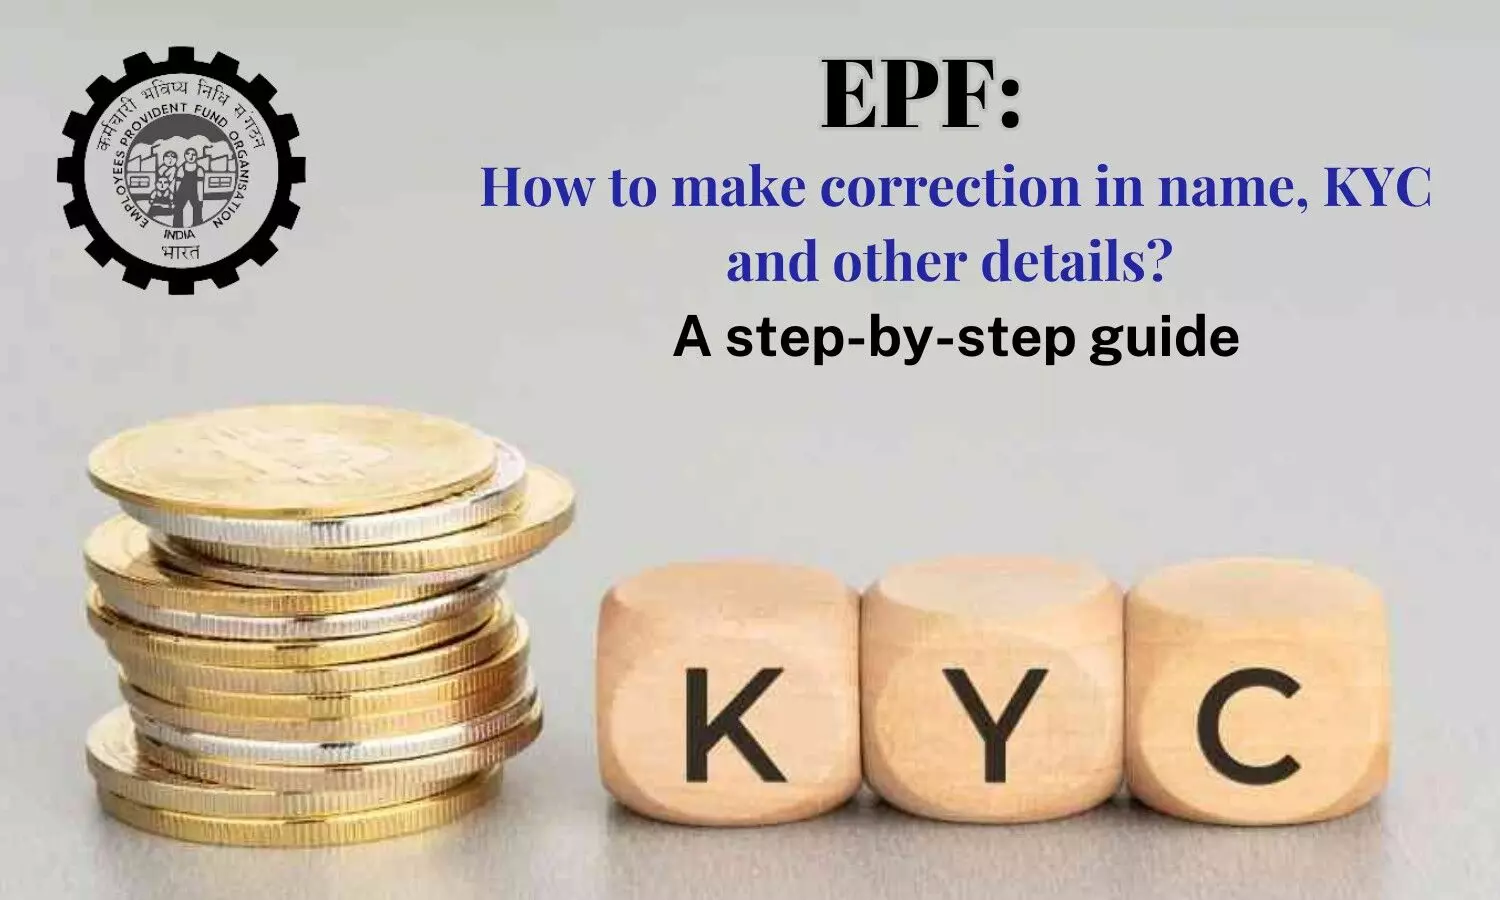 EPF: Step-by-Step Guide to Correcting Your Name, KYC, and Other Details